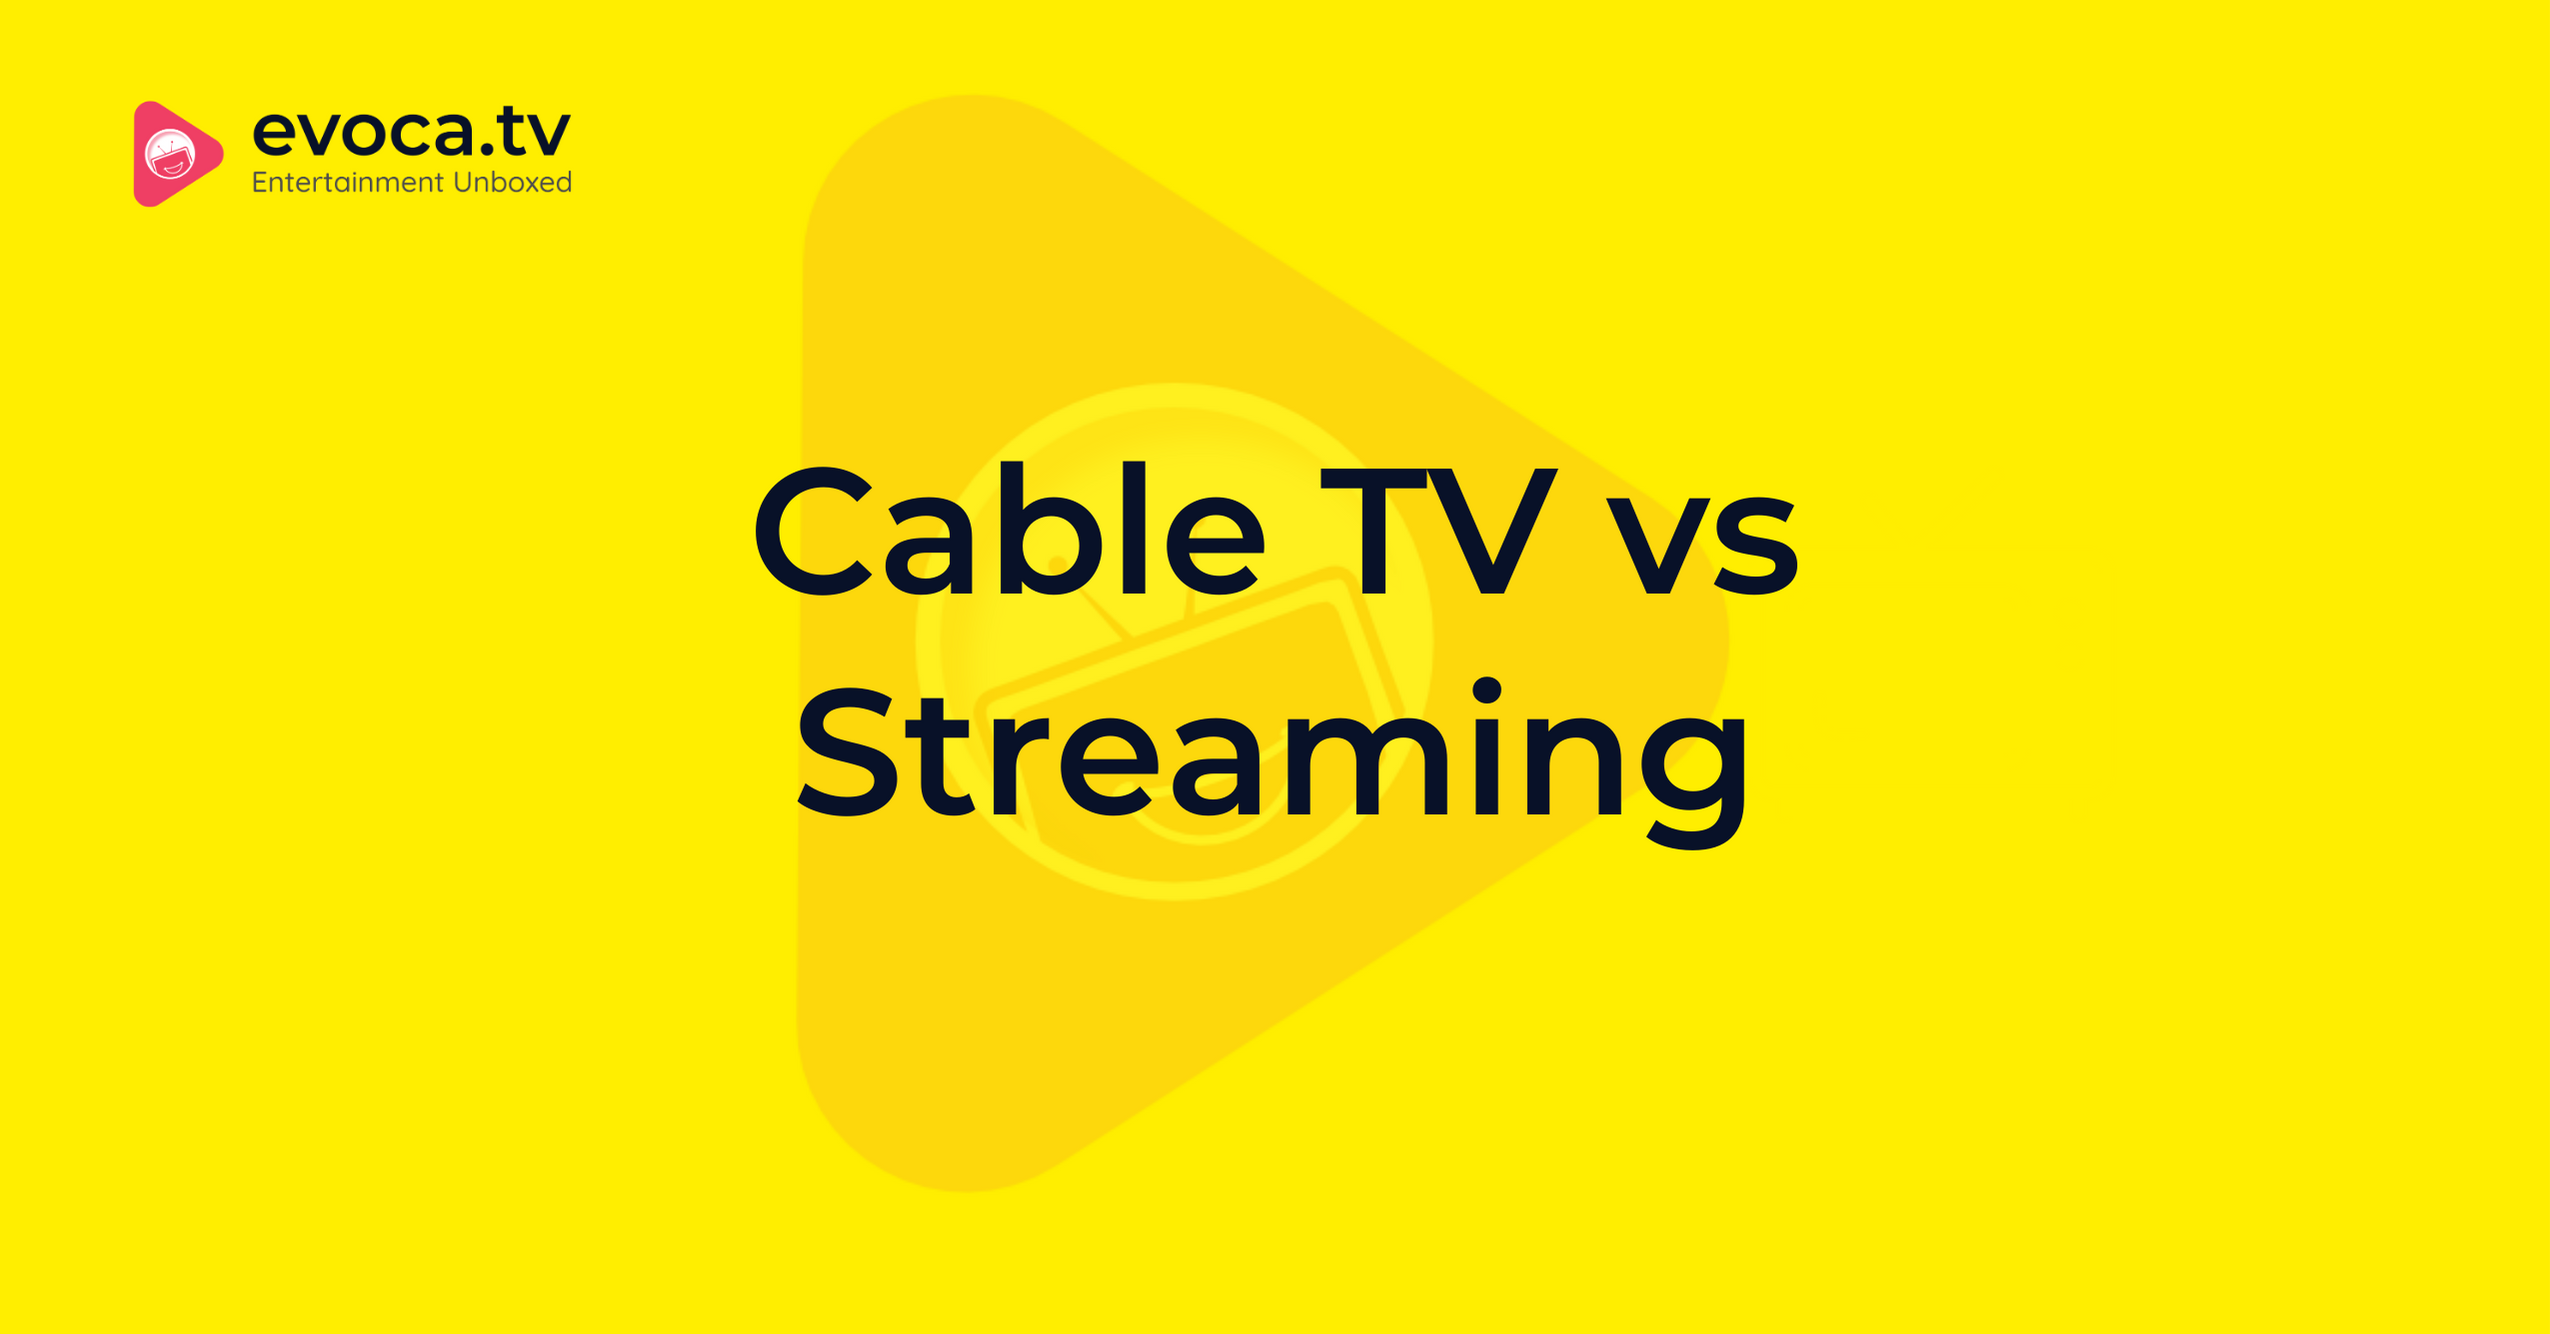 Cable TV vs Streaming (1)